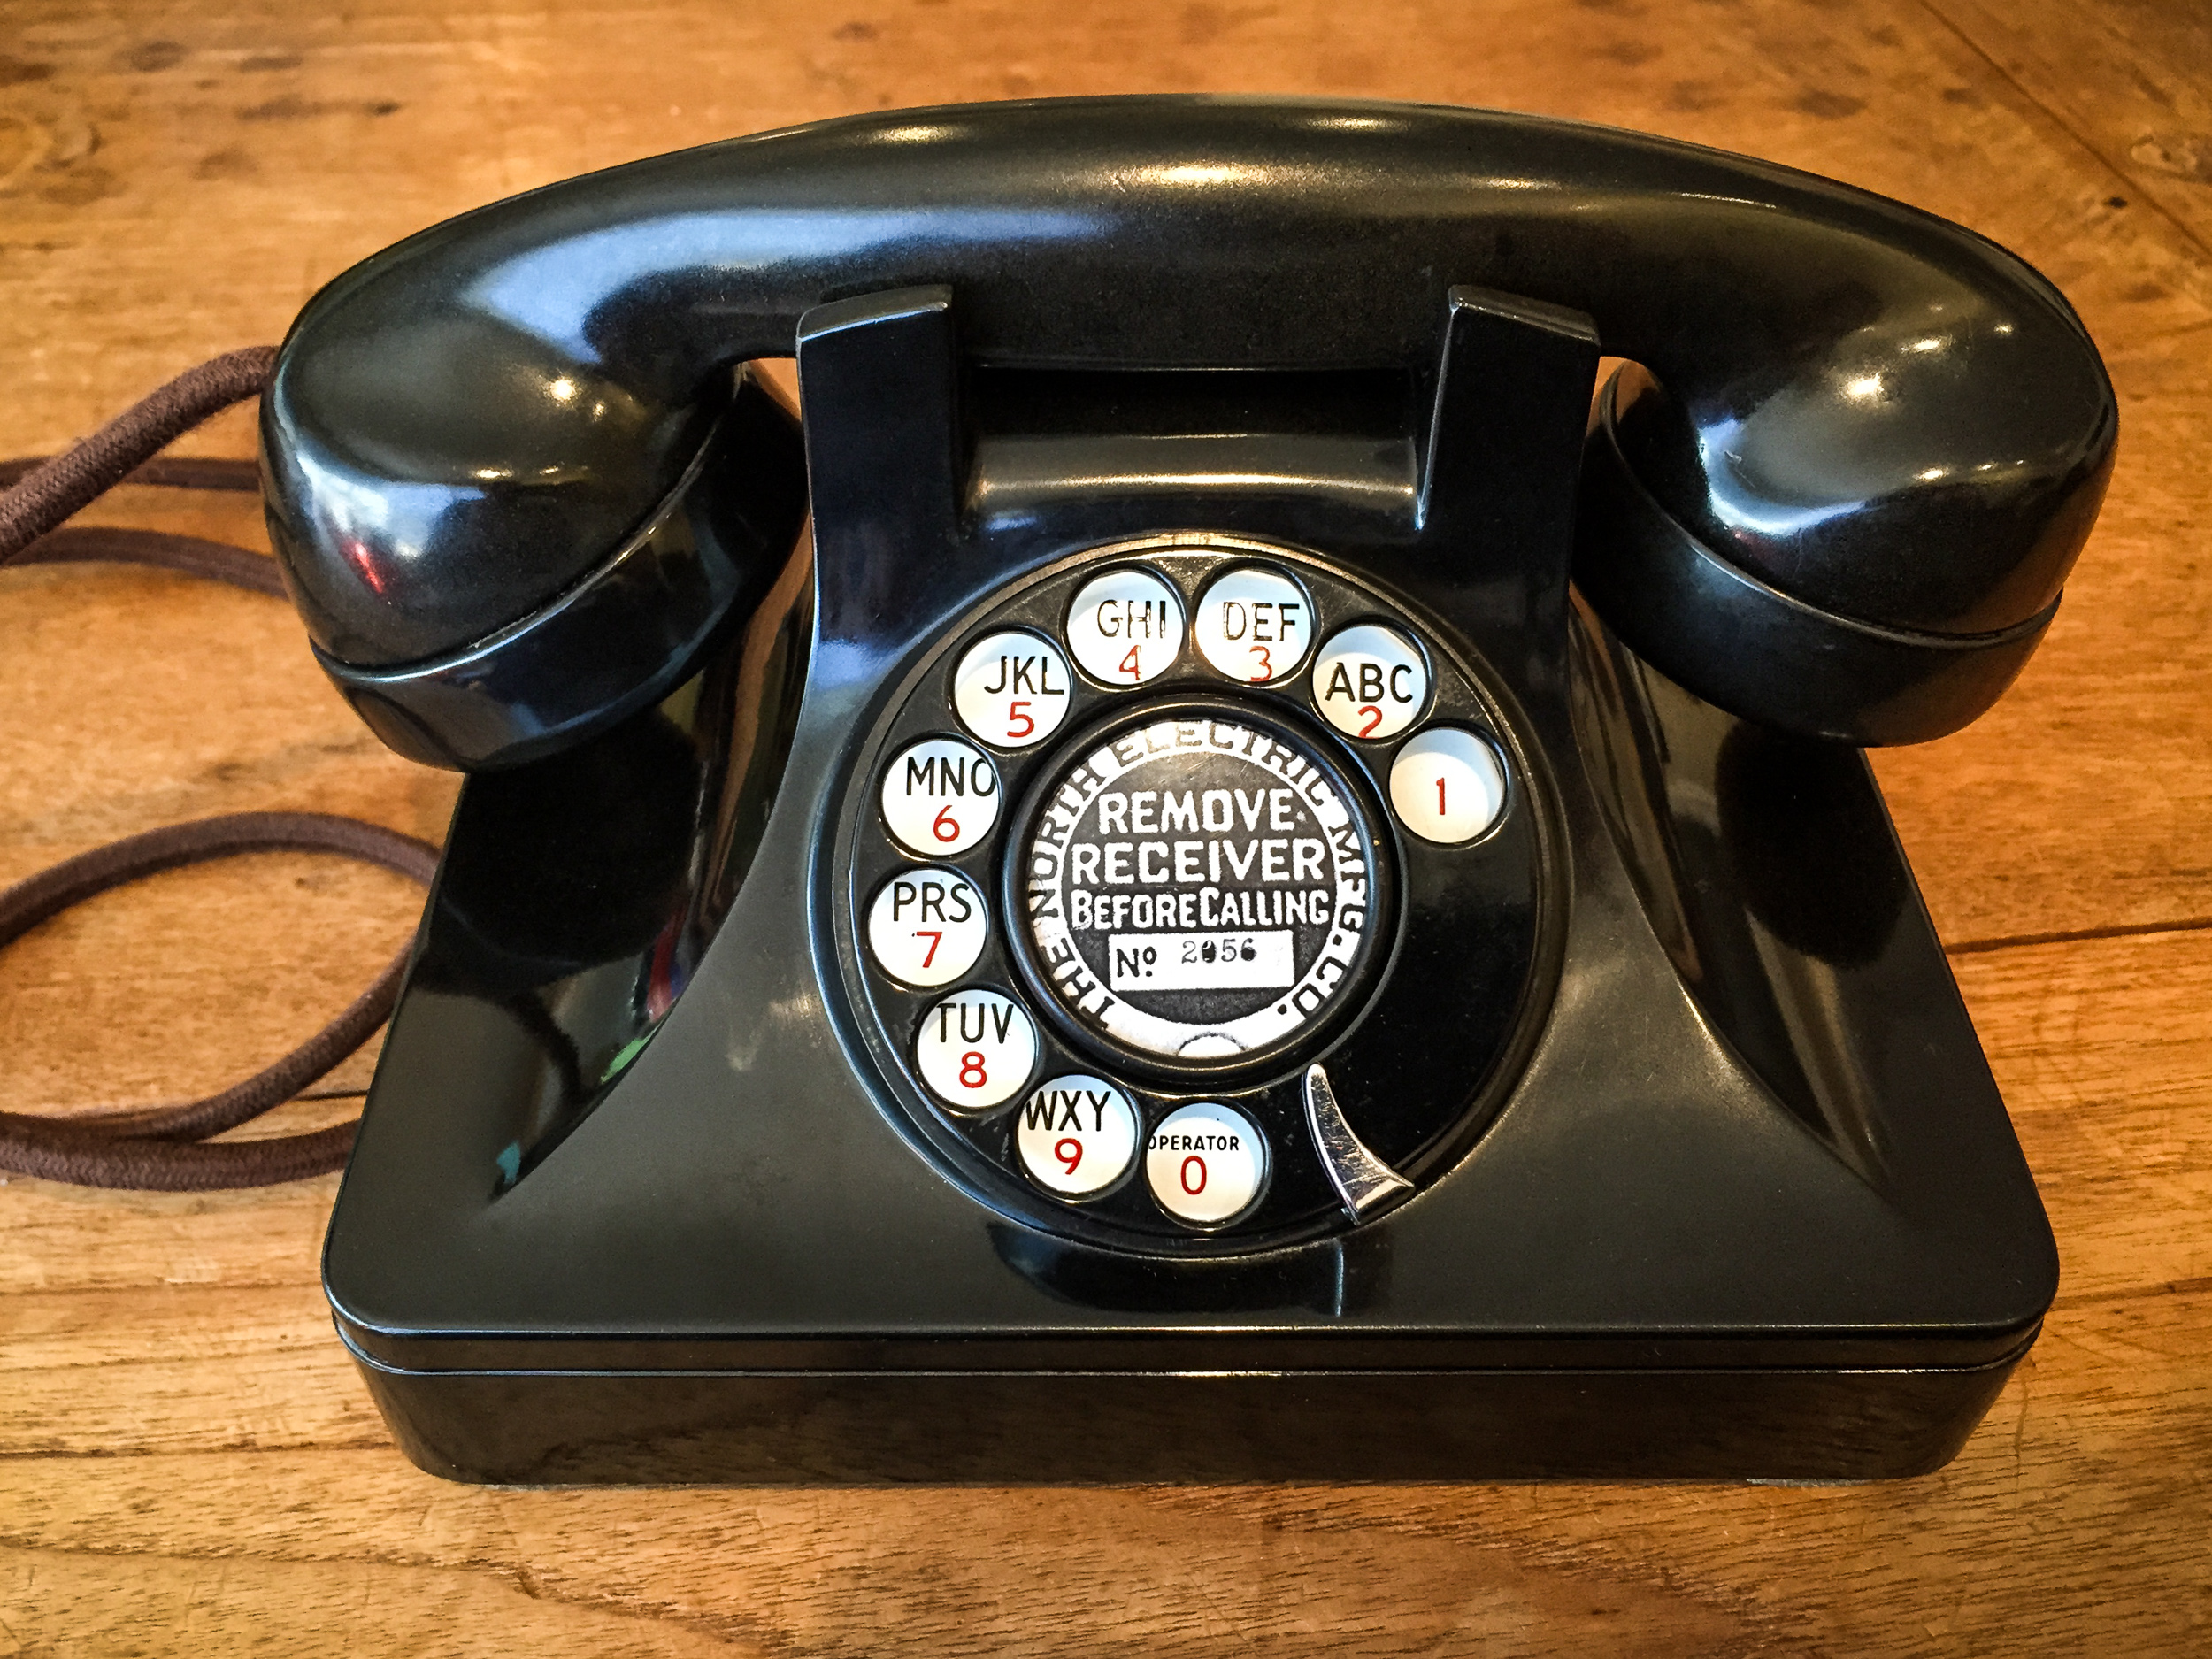 Rotary phone and Asterisk: A nerd's Howto